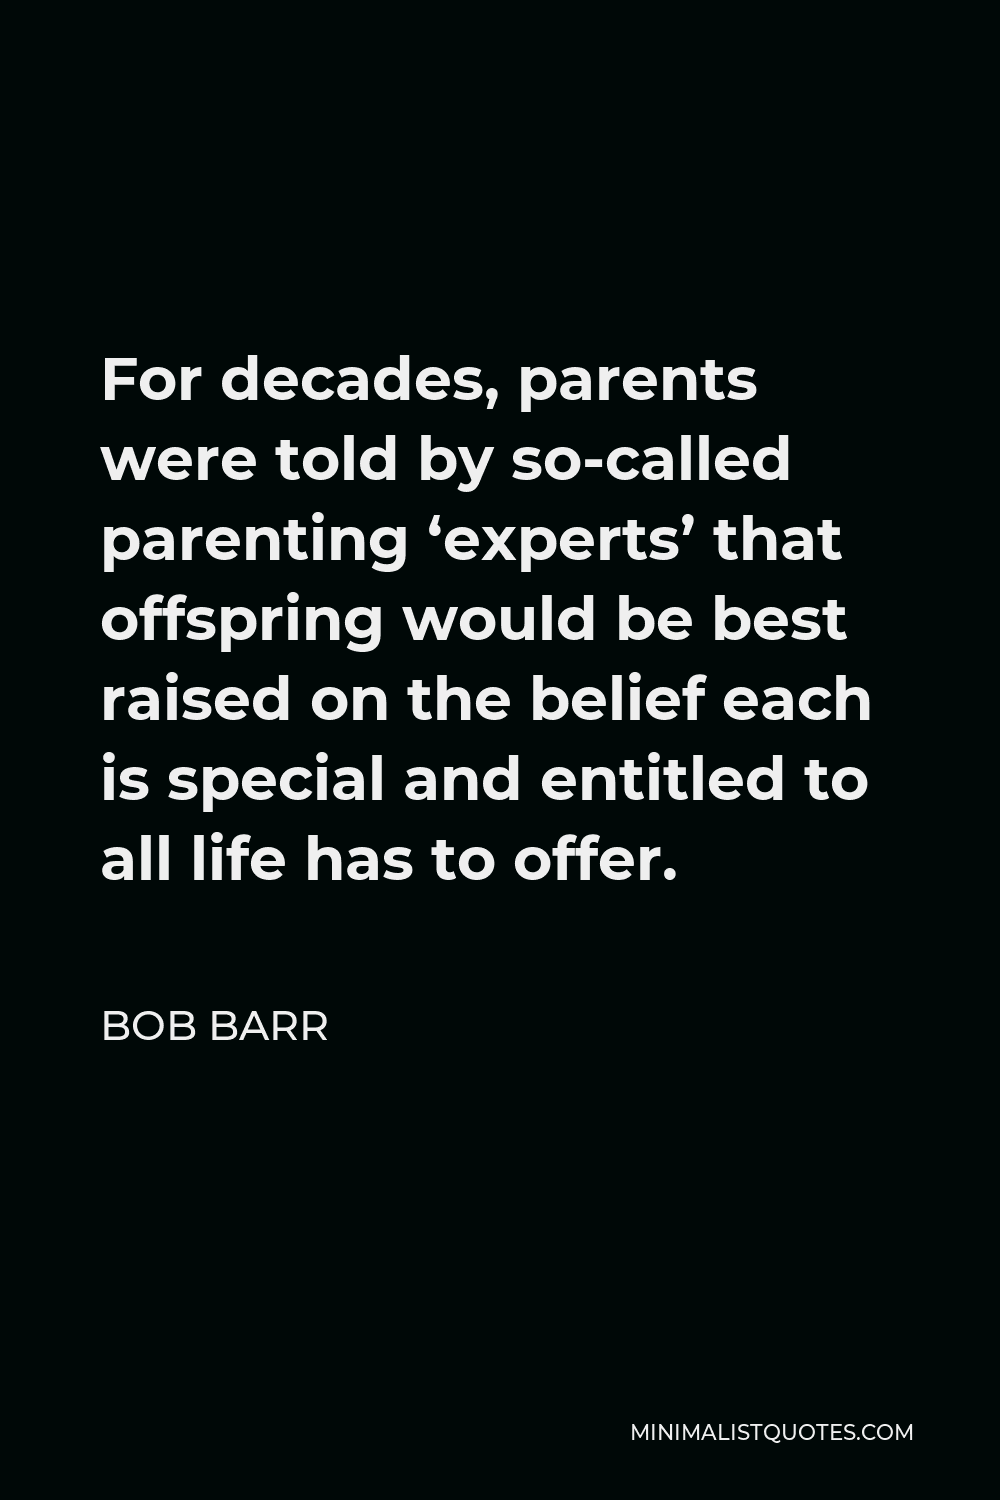 Bob Barr Quote - For decades, parents were told by so-called parenting ‘experts’ that offspring would be best raised on the belief each is special and entitled to all life has to offer.